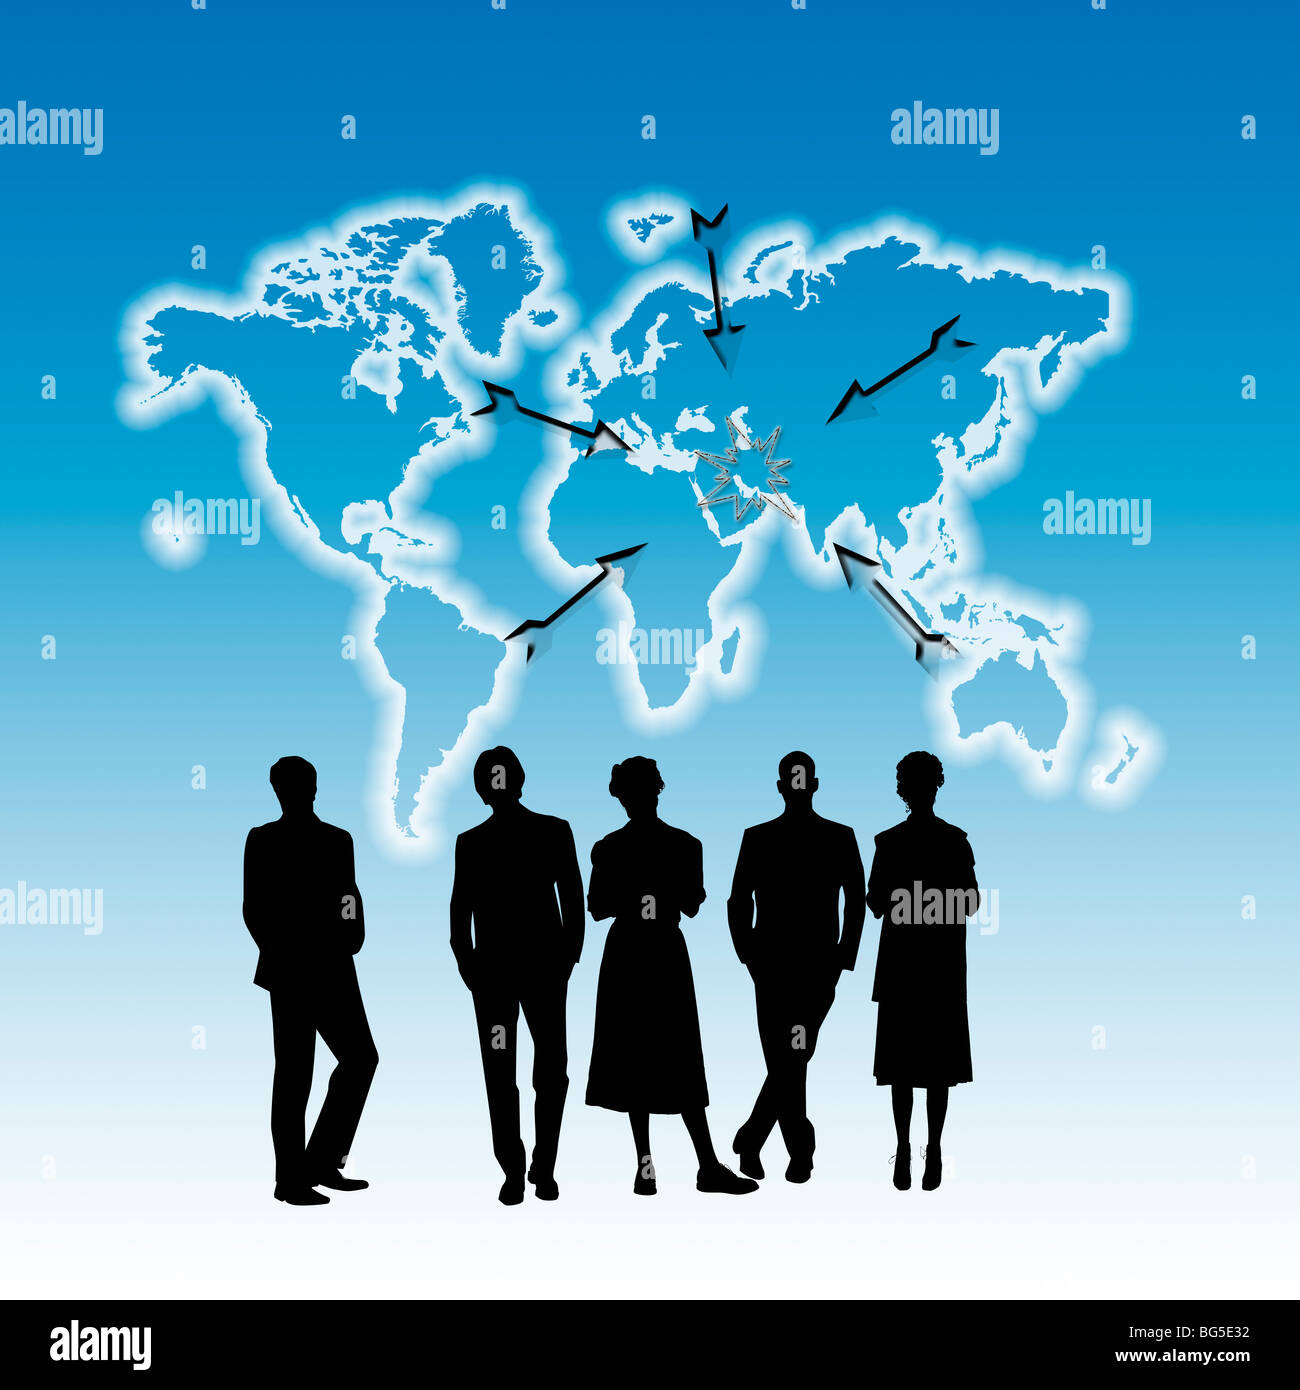 Silhouettes of People looking at a Large World Map with arrows pointing to Iraq, Iran and Afganistan Stock Photo